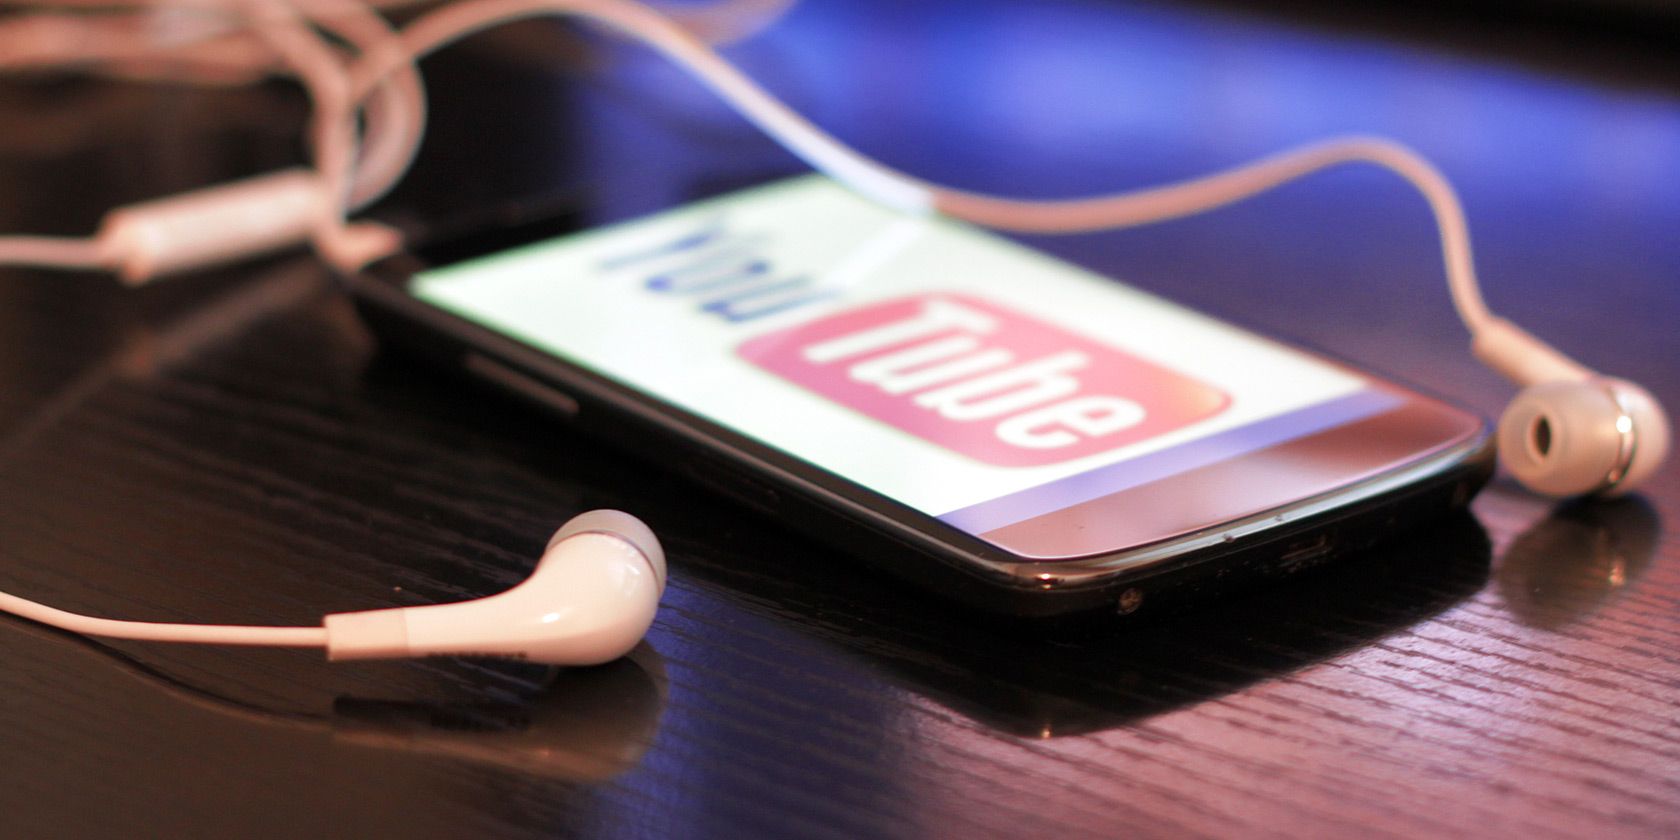 Phone on table showing the YouTube logo, with earbuds connected